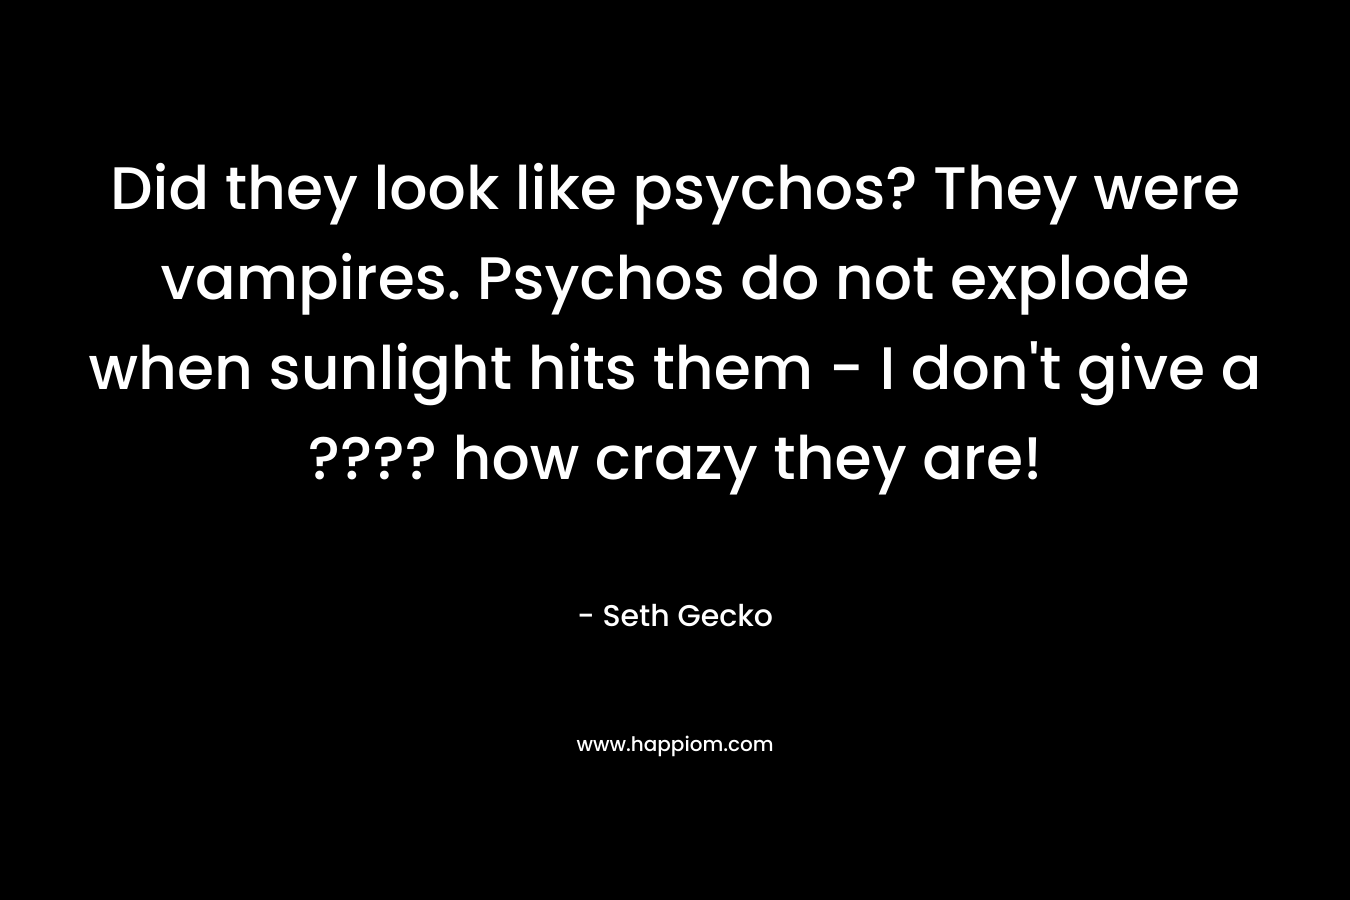 Did they look like psychos? They were vampires. Psychos do not explode when sunlight hits them - I don't give a ???? how crazy they are!